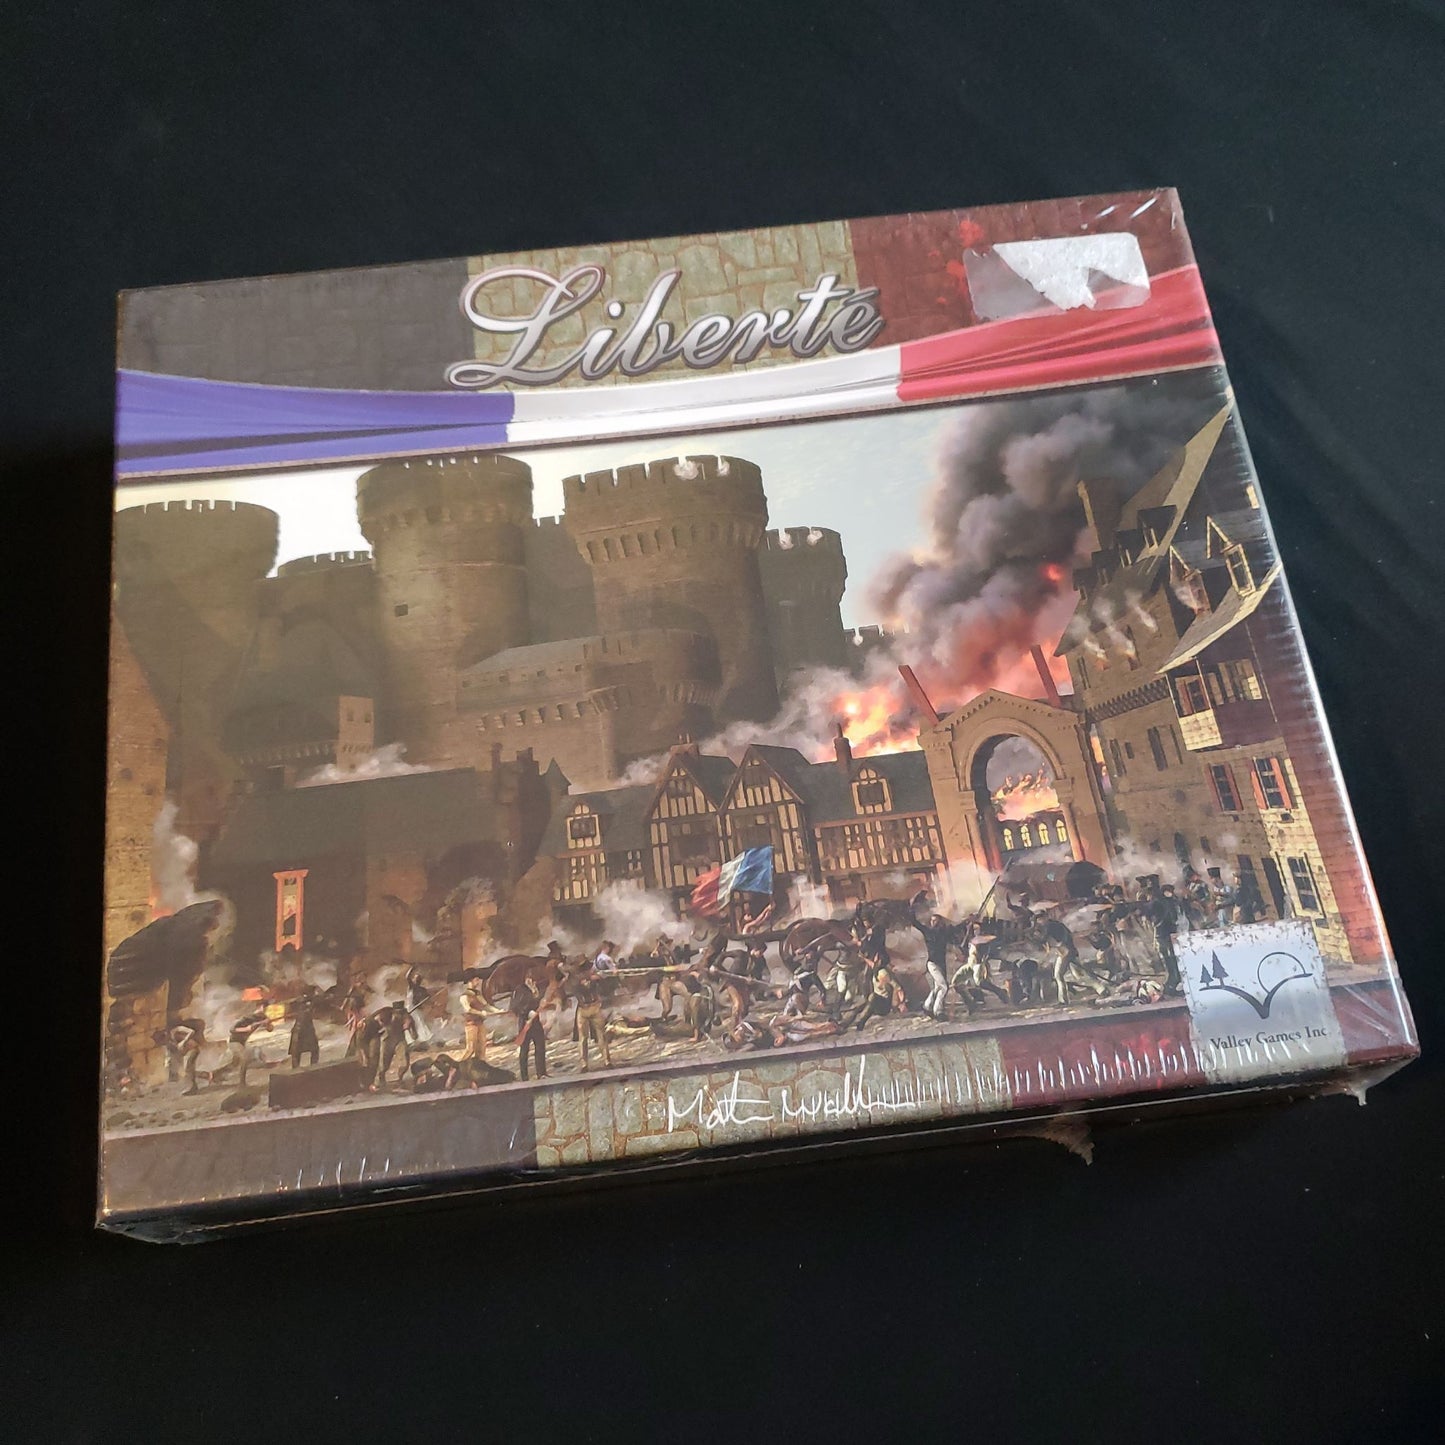 Image shows the front cover of the box of the Liberte board game